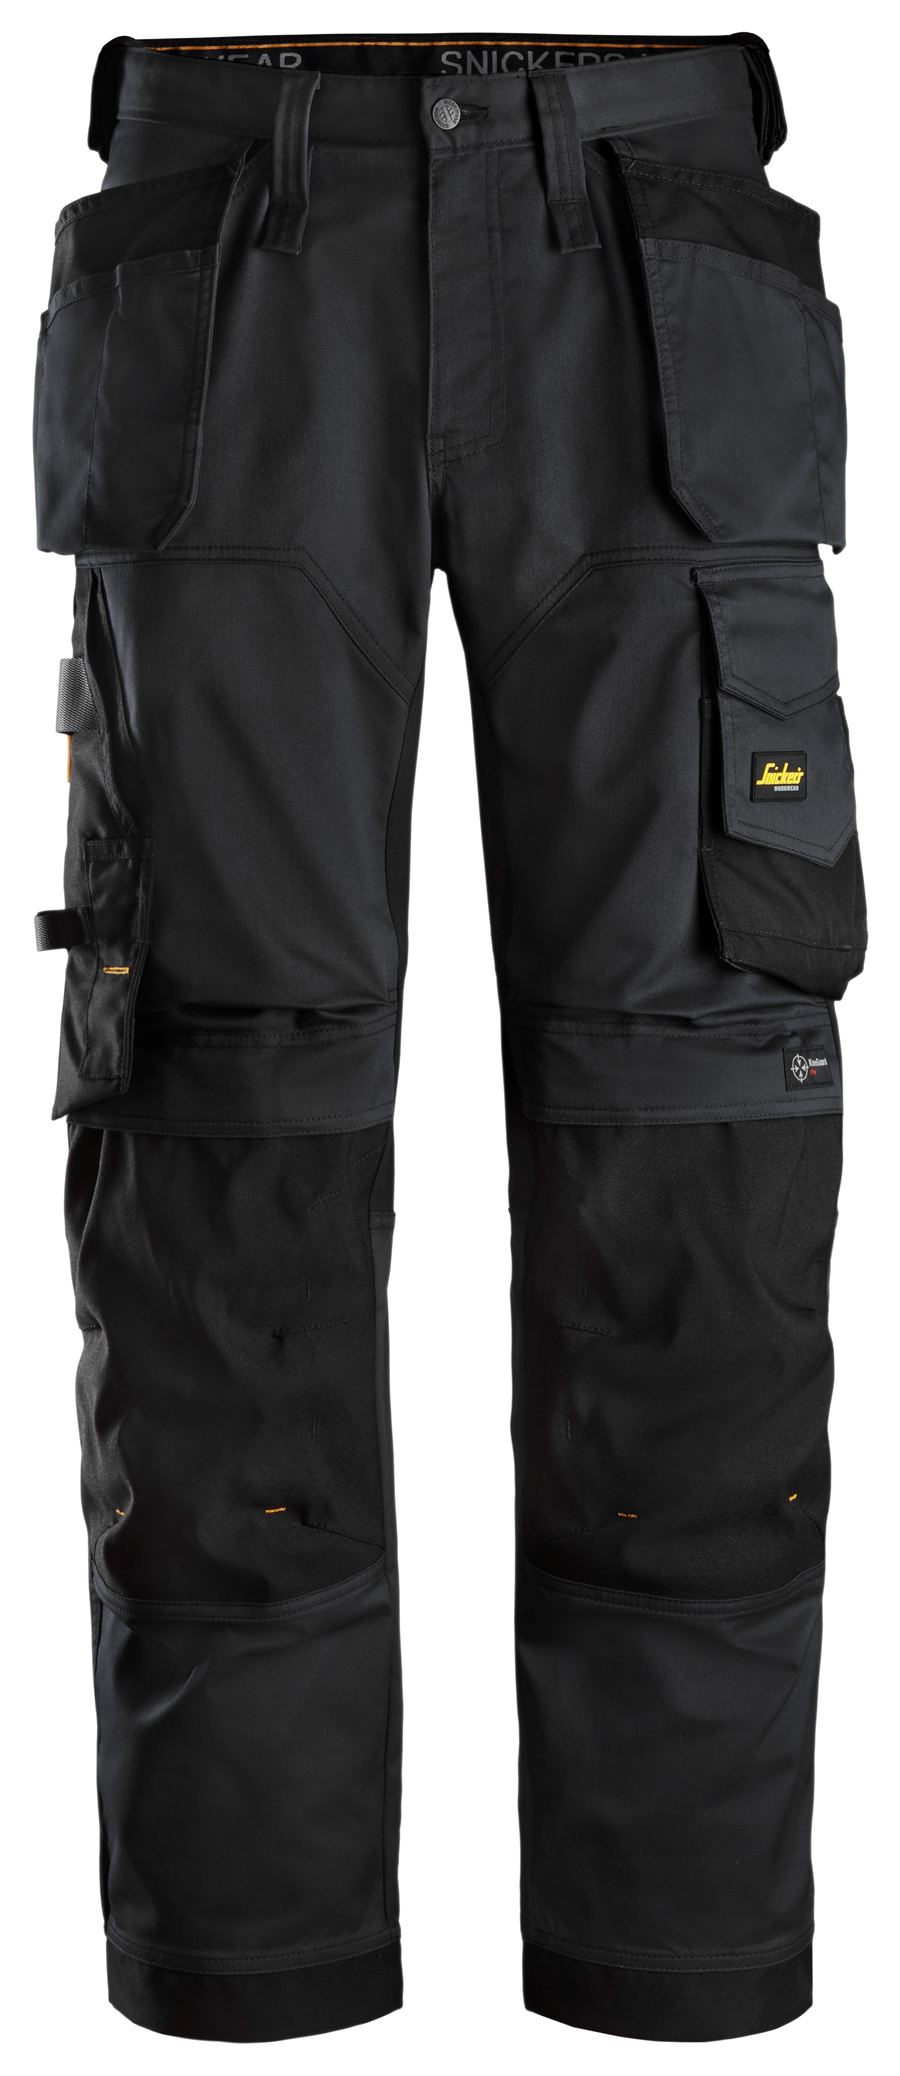 Snickers Service 6801 Navy Trousers with Kneepad Pockets  Snickers   Trousers  Arco